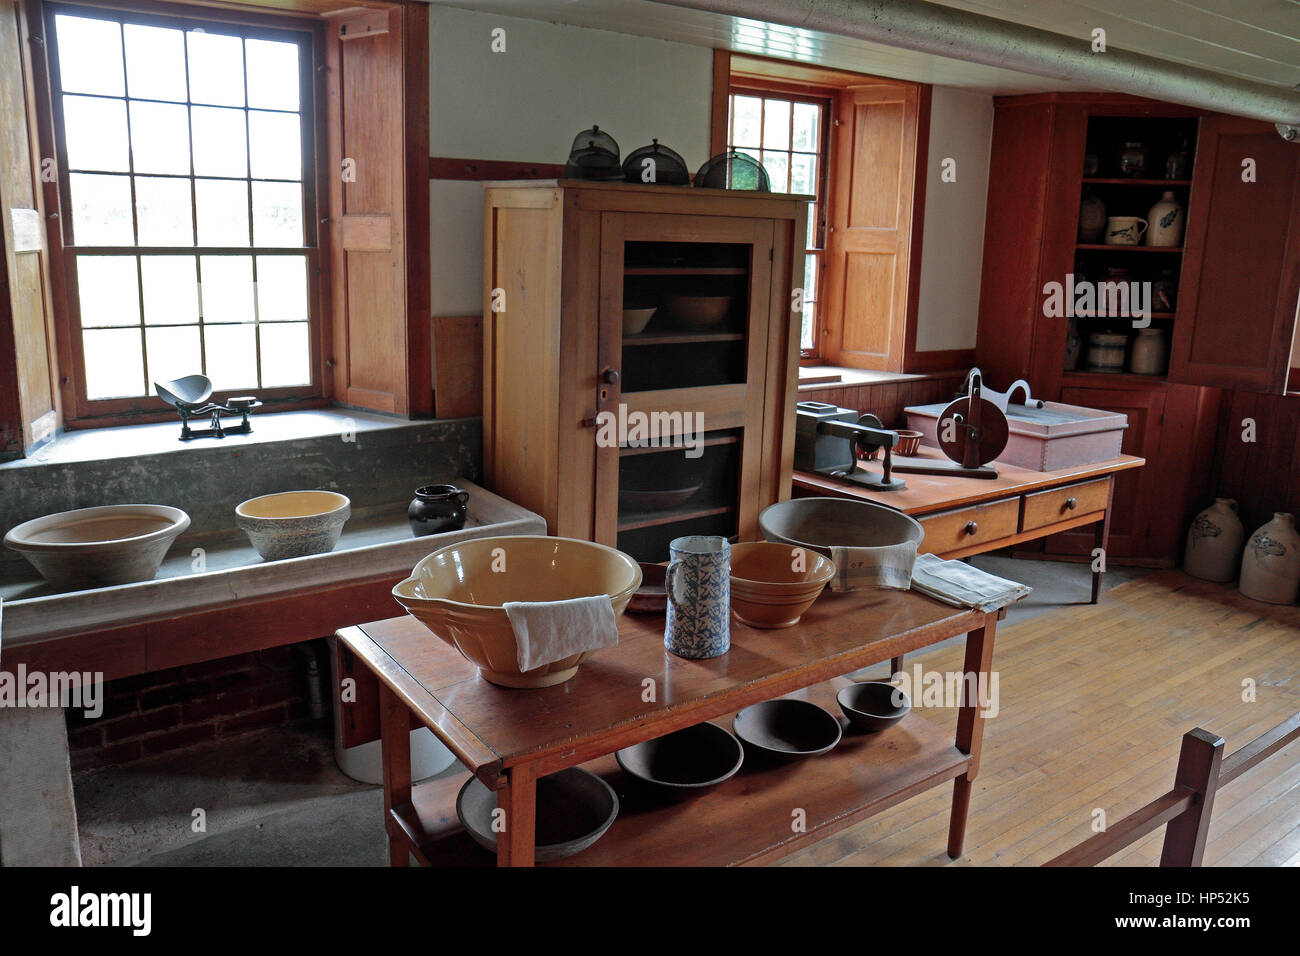 The kitchen in the Brick Dwelling in the Hancock, Massachusetts, United States. Stock Photo